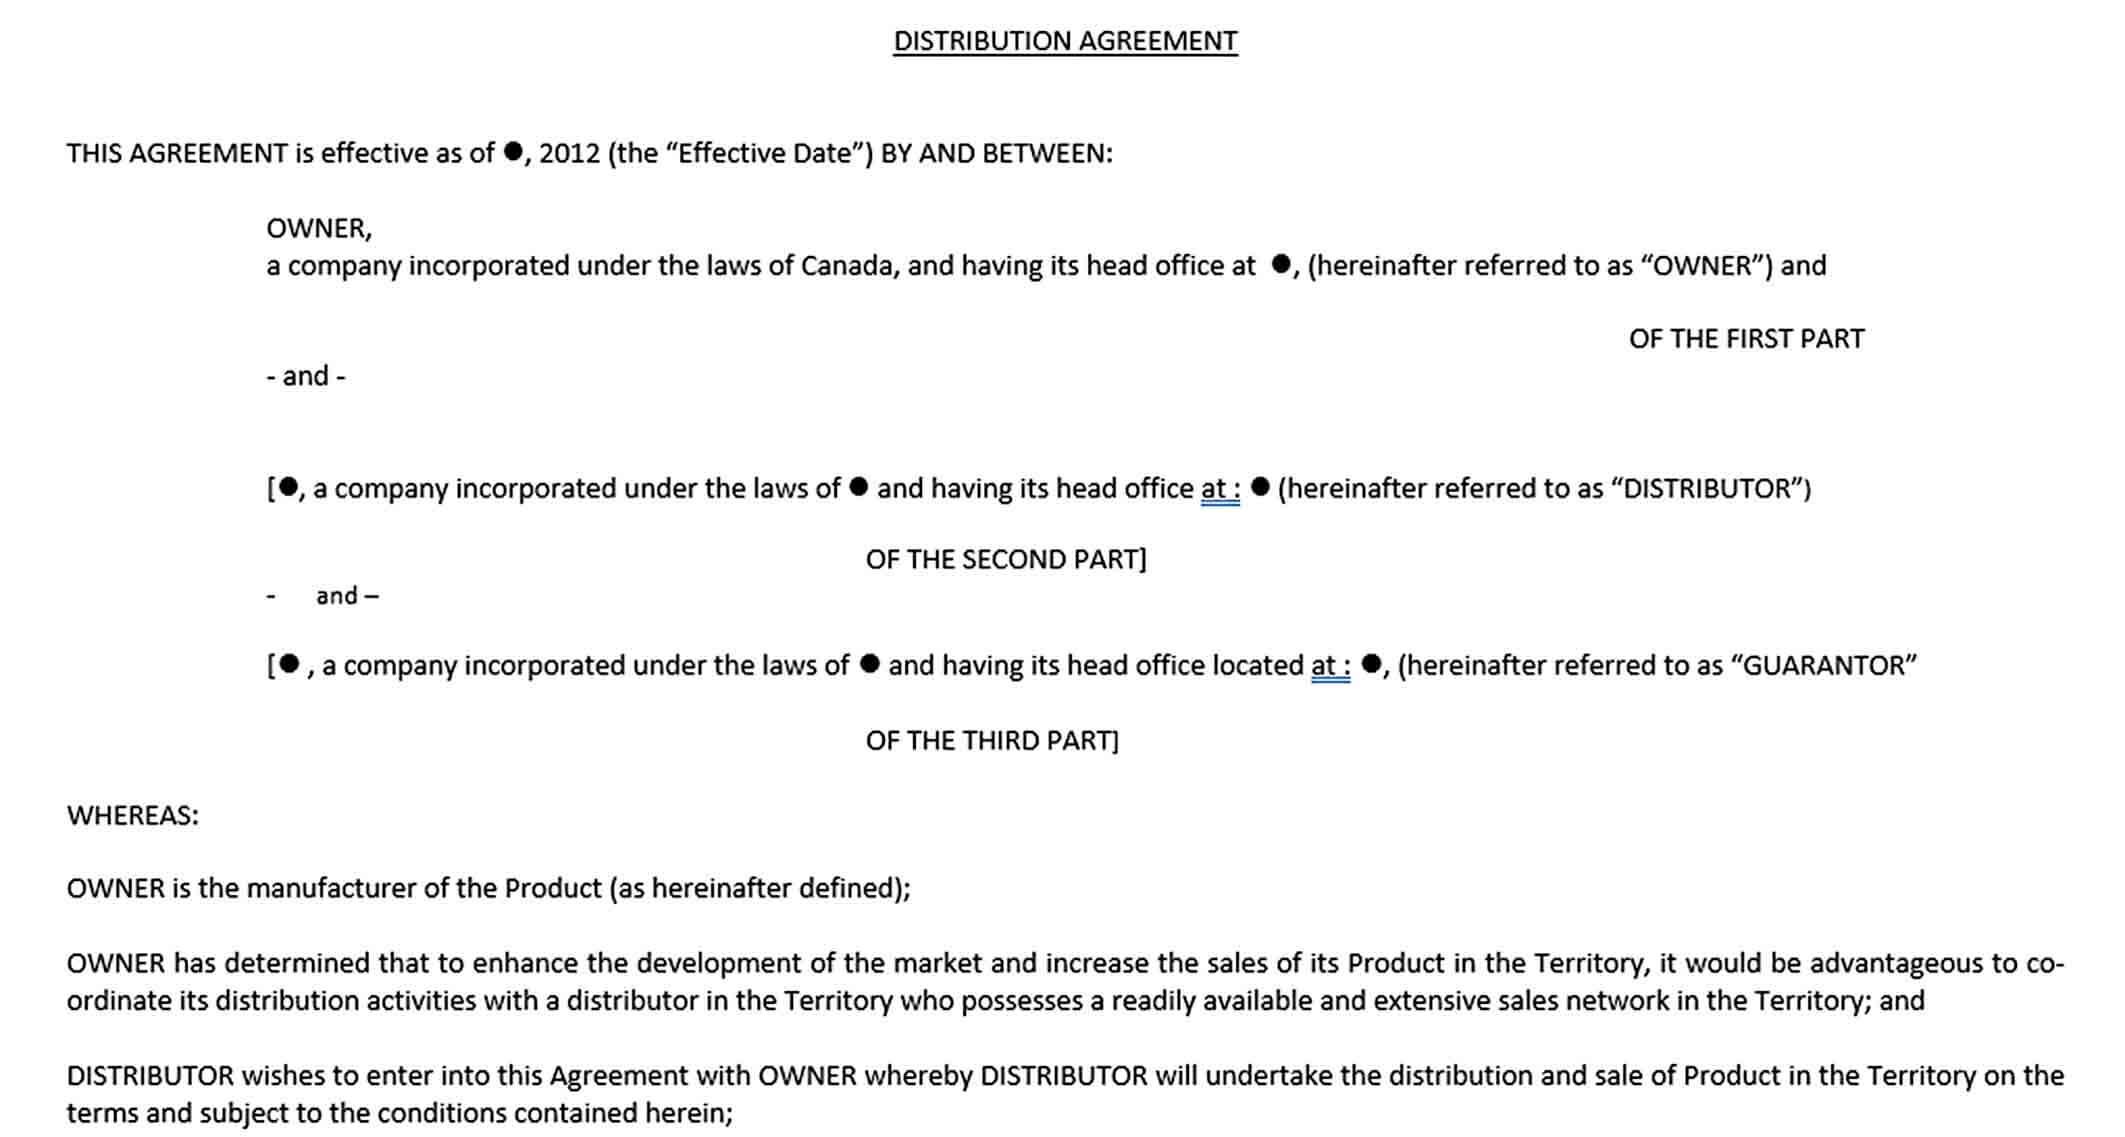 Sample Owner Distributution Agreement Template